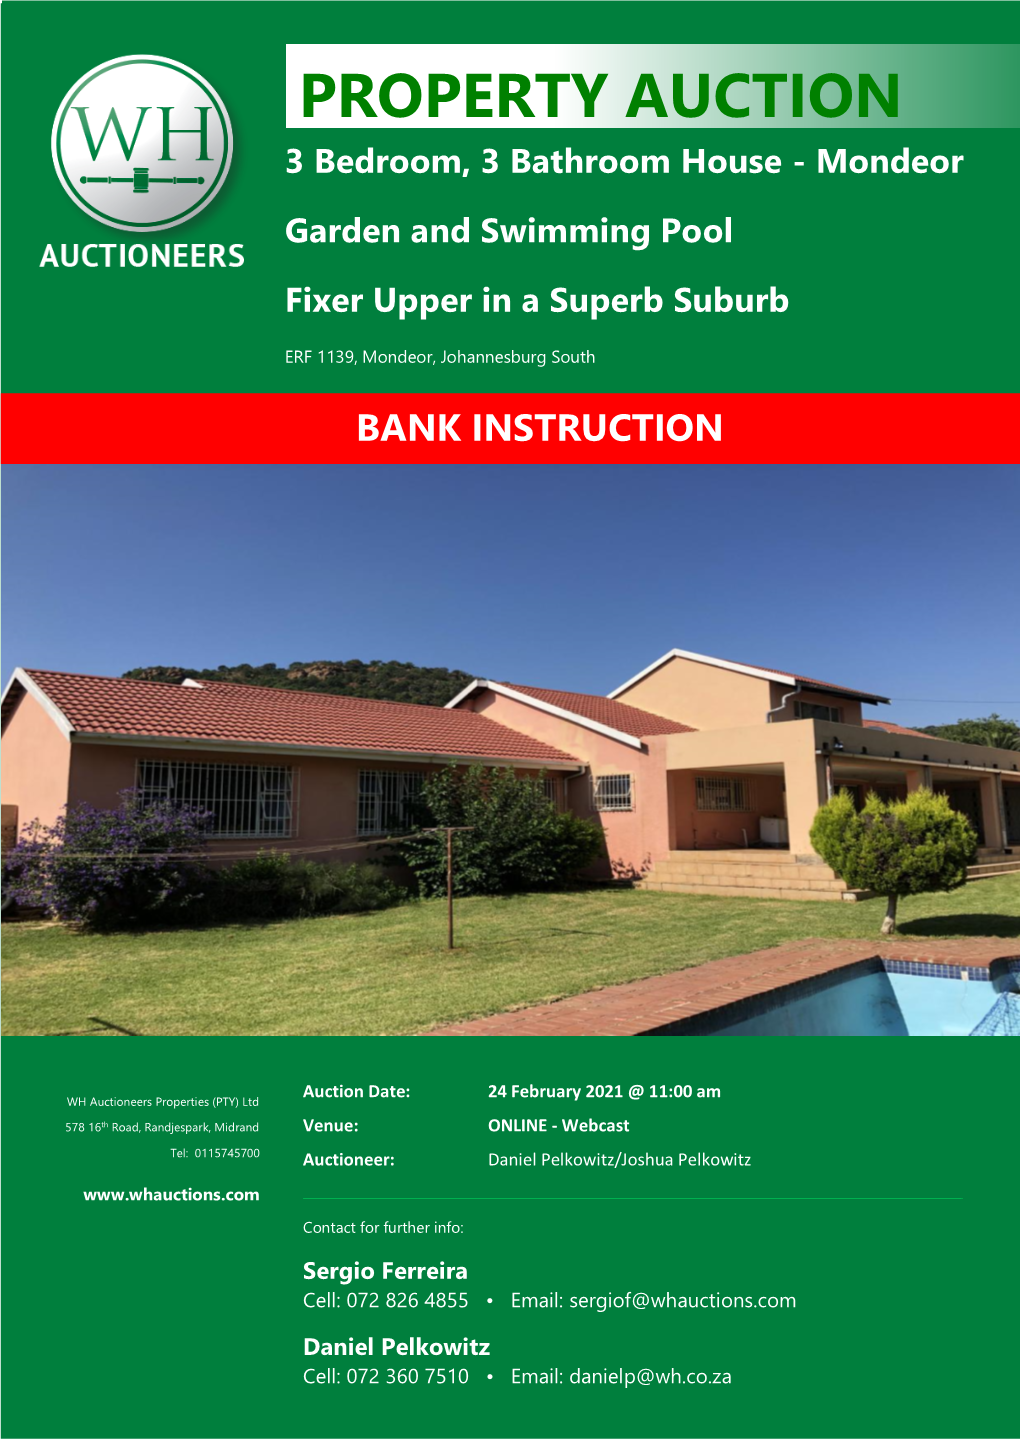 PROPERTY AUCTION AUCTION 3 Bedroom, 3 Bathroom House - Mondeor